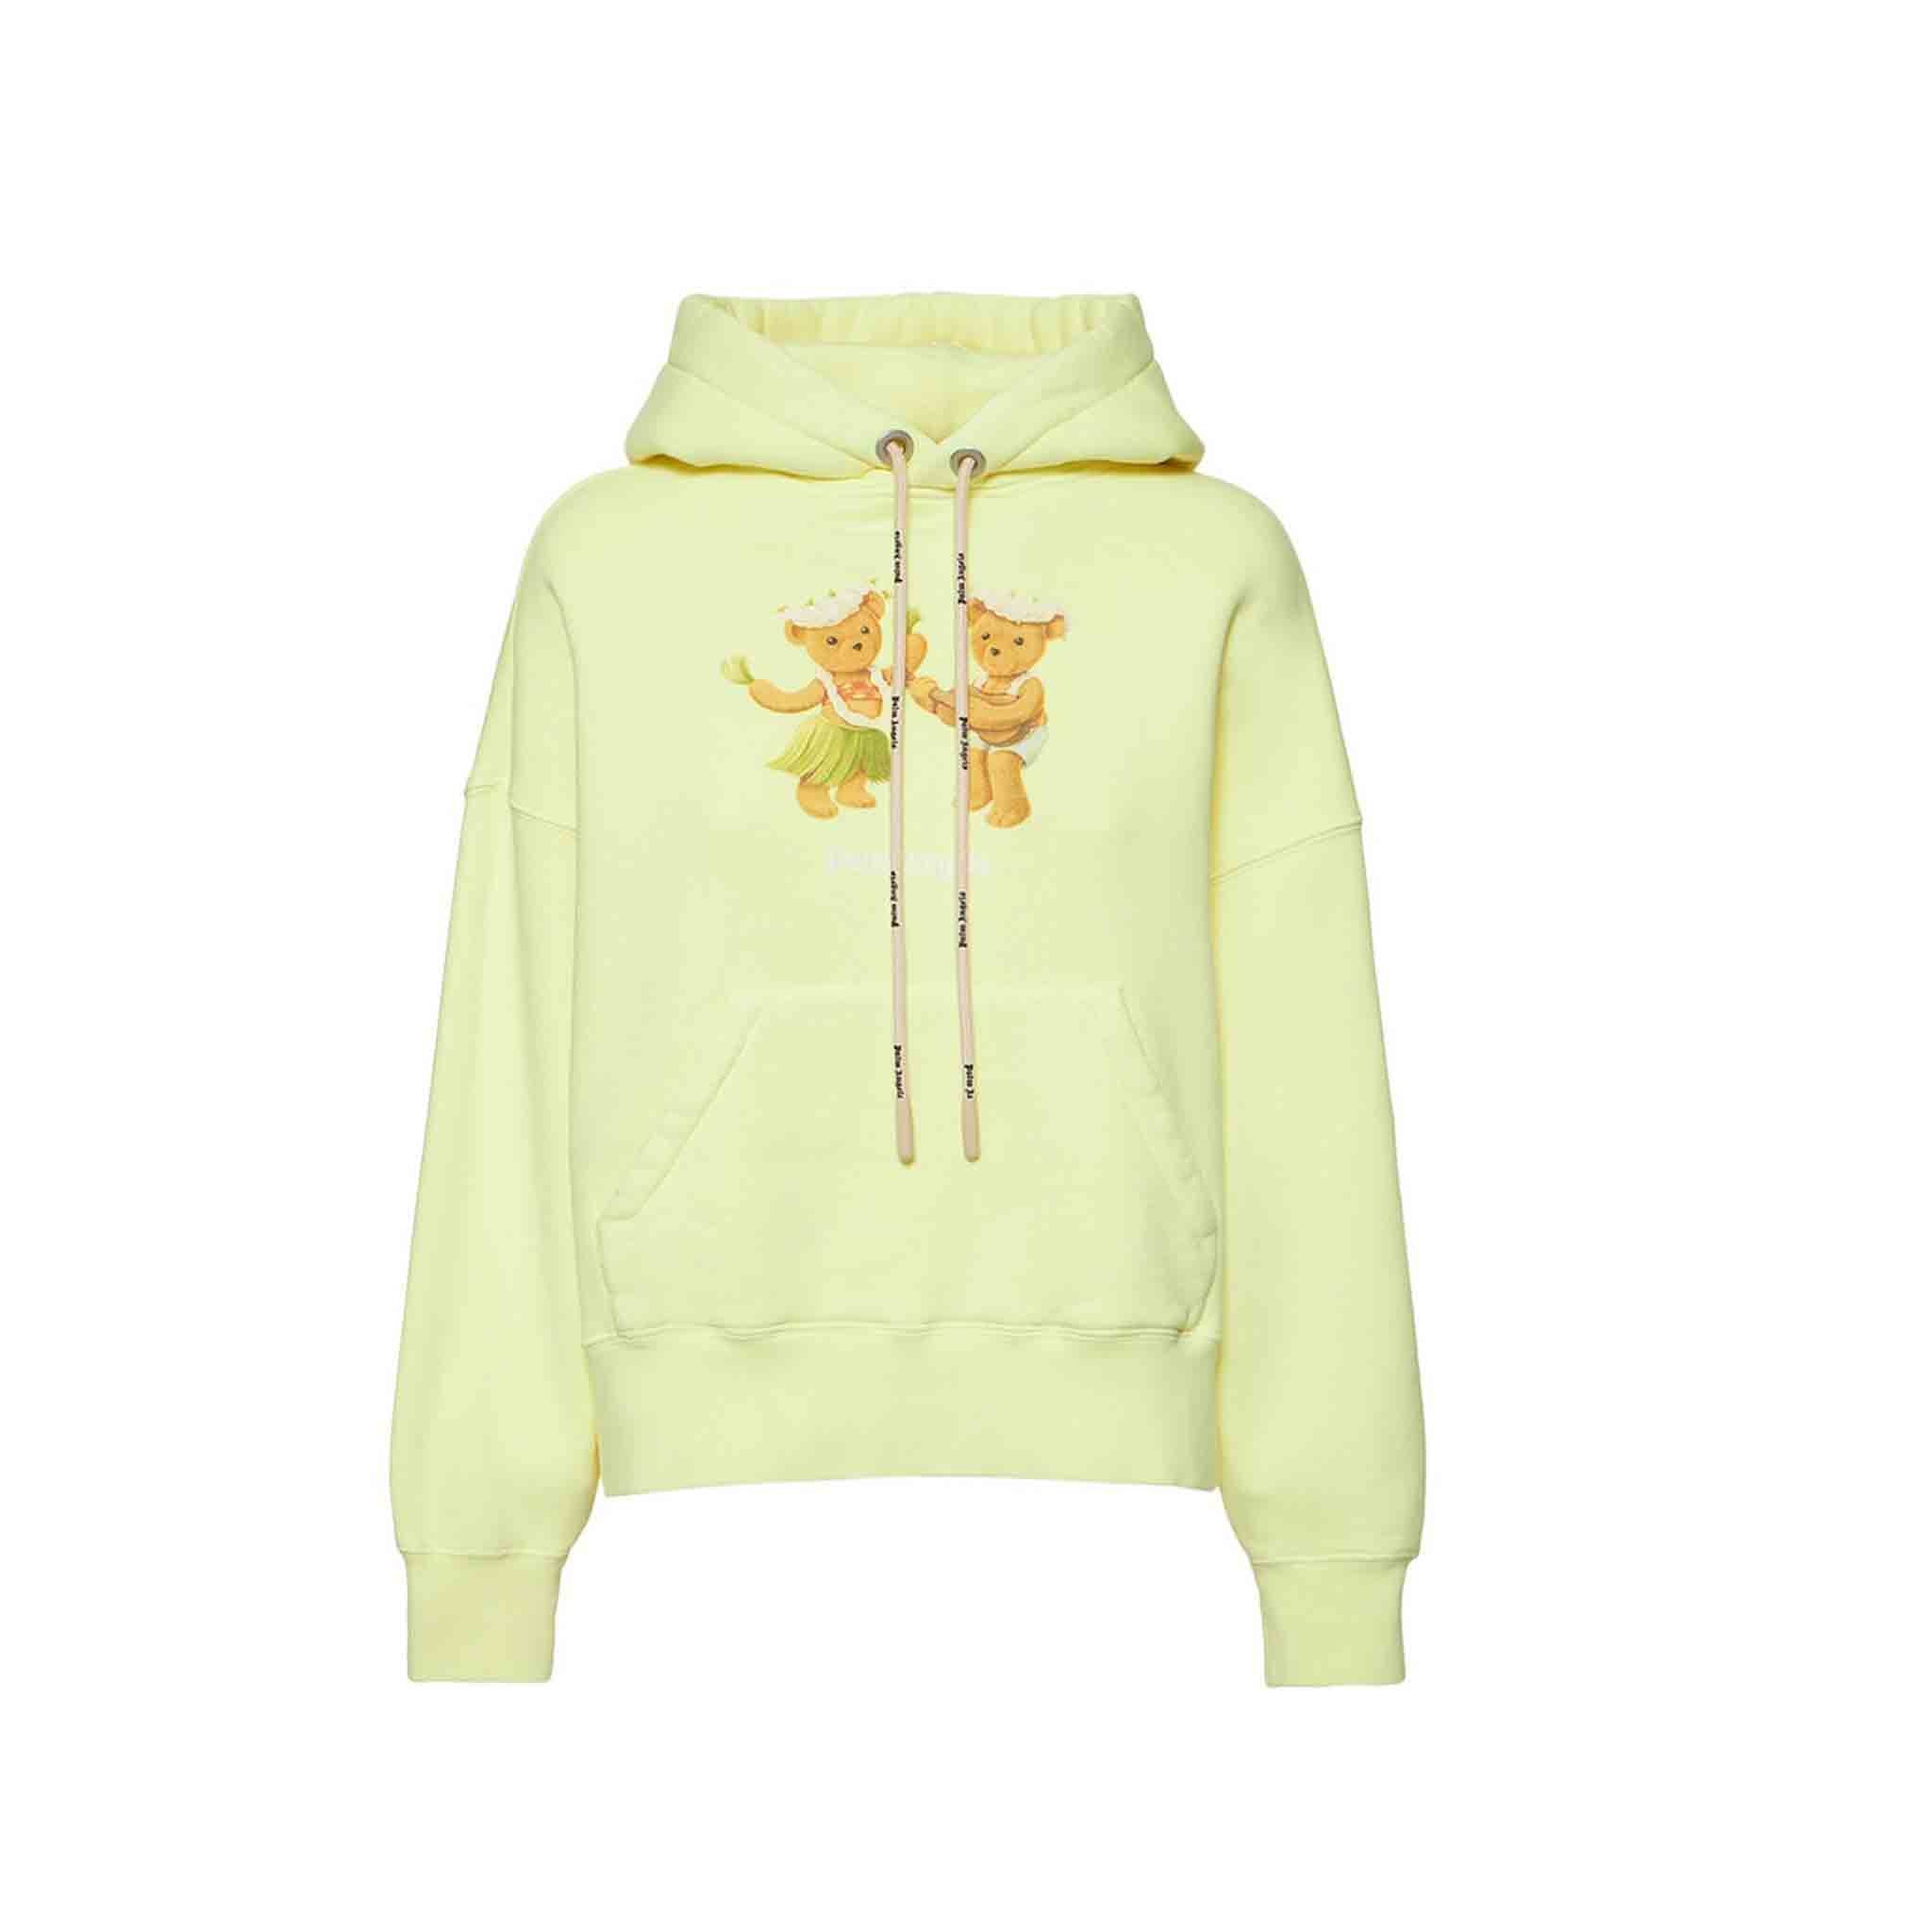 Stay stylish and comfortable in this Palm Angels hoodie. The cuffed long sleeves and regular fit provide a comfortable and relaxed fit, while the yellow fluo shade adds a pop of color. The hood adds a touch of practicality and the dancing bear graphic adds a touch of fun. Made from 100% cotton, this hoodie is both comfortable and lightweight. Perfect for any casual occasion.